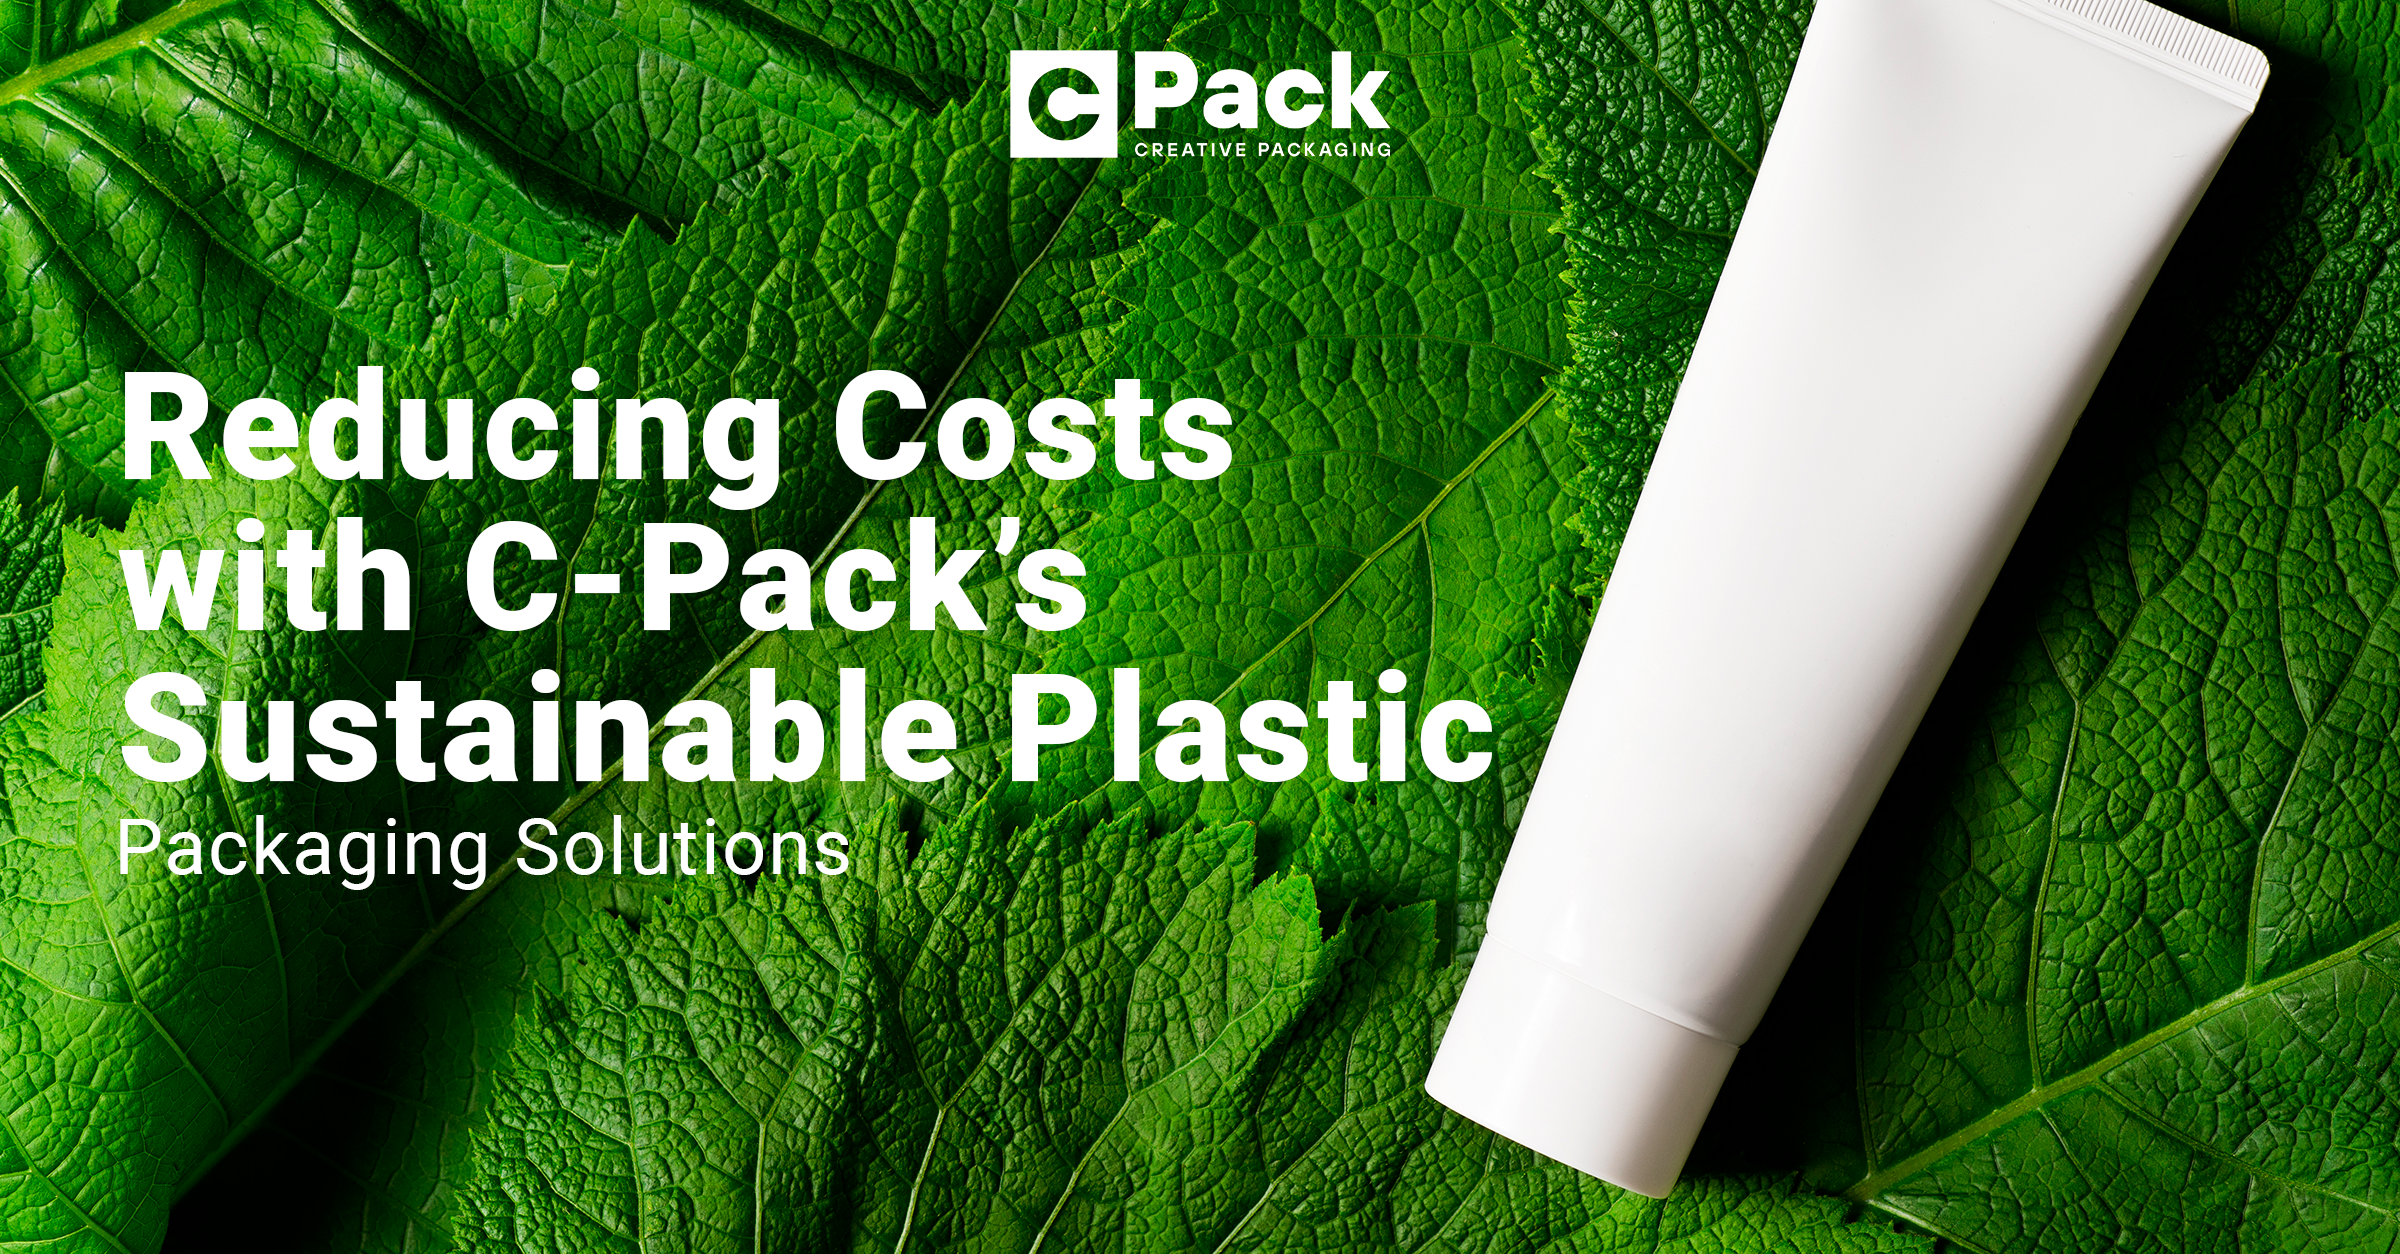 Image emphasizing cost reduction with C-Pack's sustainable plastic packaging solutions.